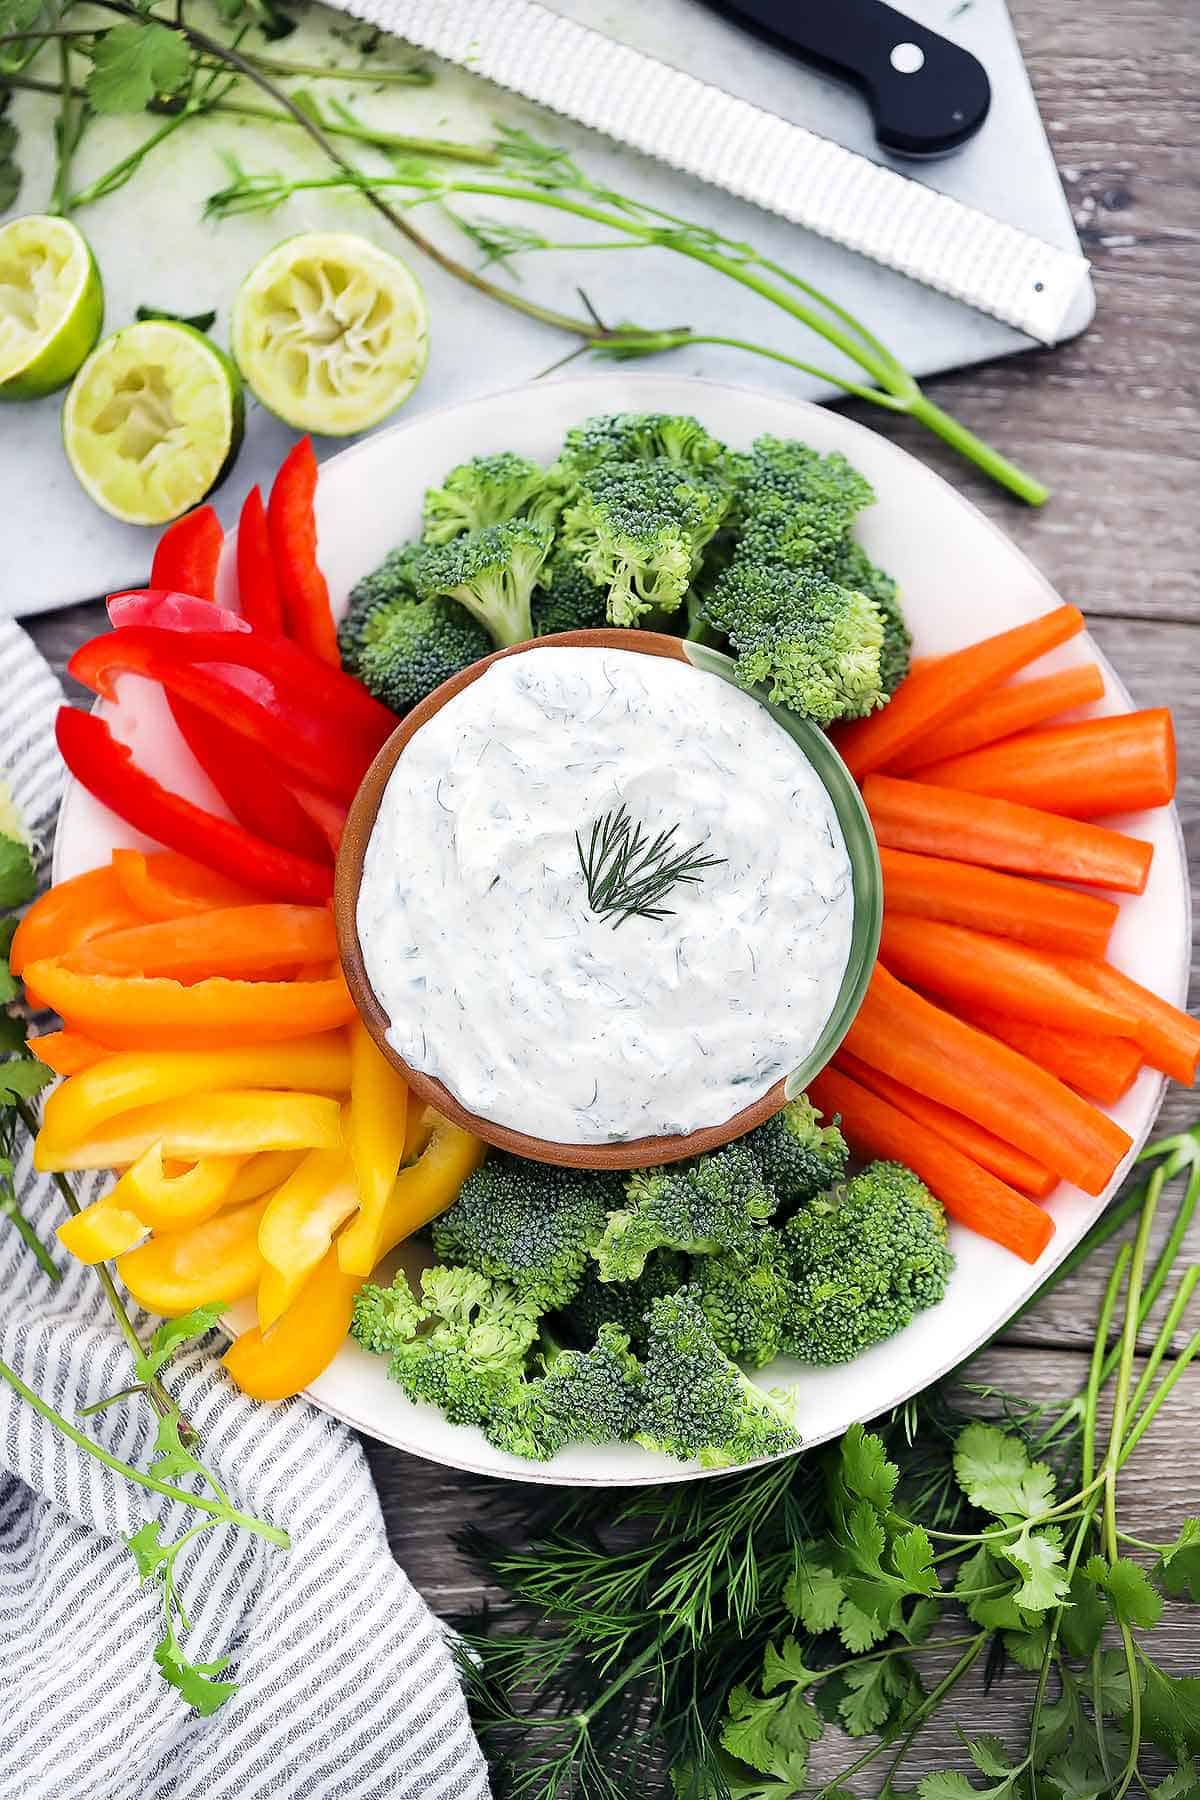 Overhead photo of a plate of cut up vegetables with dill dip.